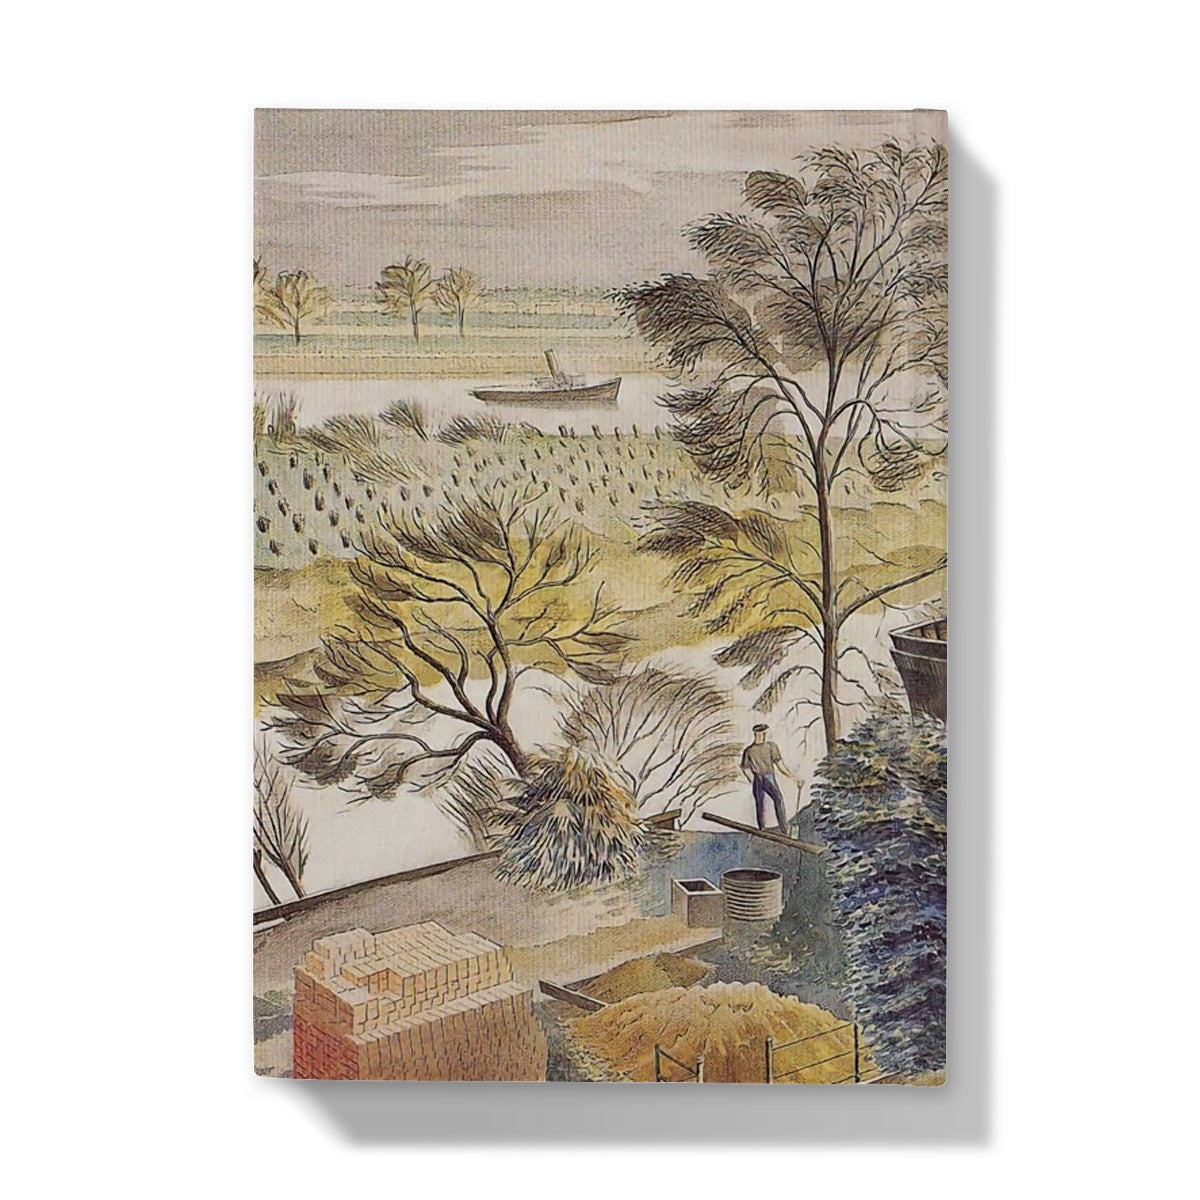 River Thames, Chiswick Eyot by Eric Ravilious, 1933 - Hardback Journal